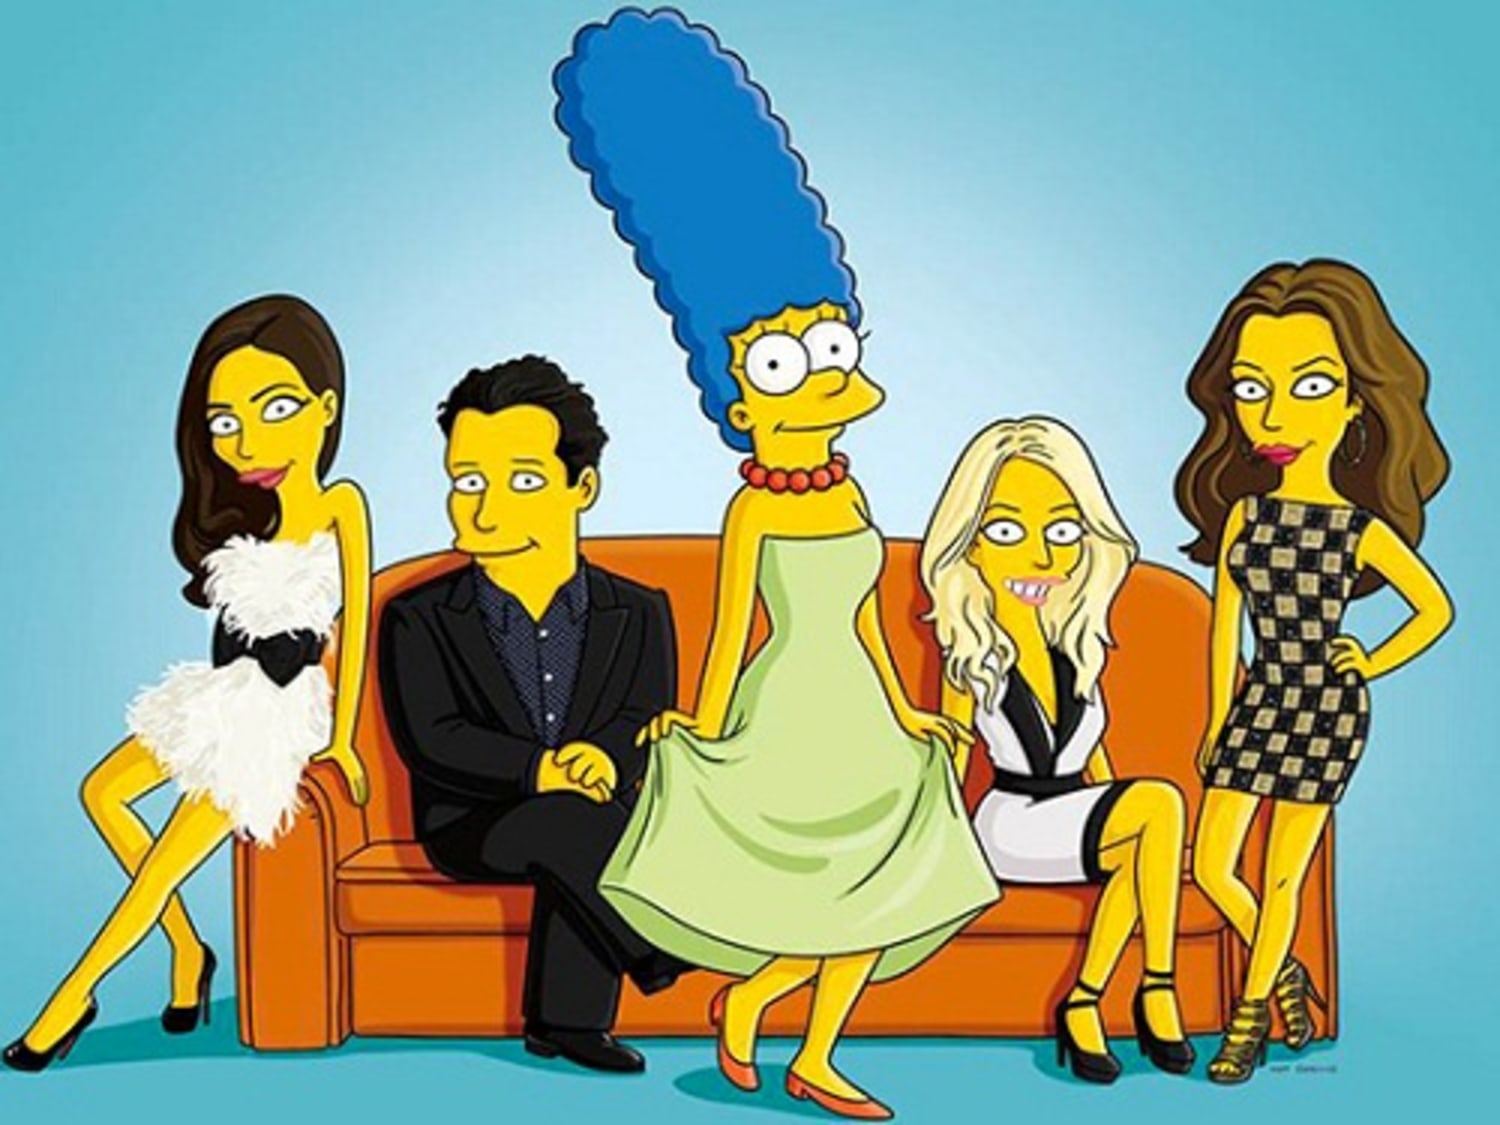 Marge Simpson finally gets a new dress, thanks to 'Project Runway'